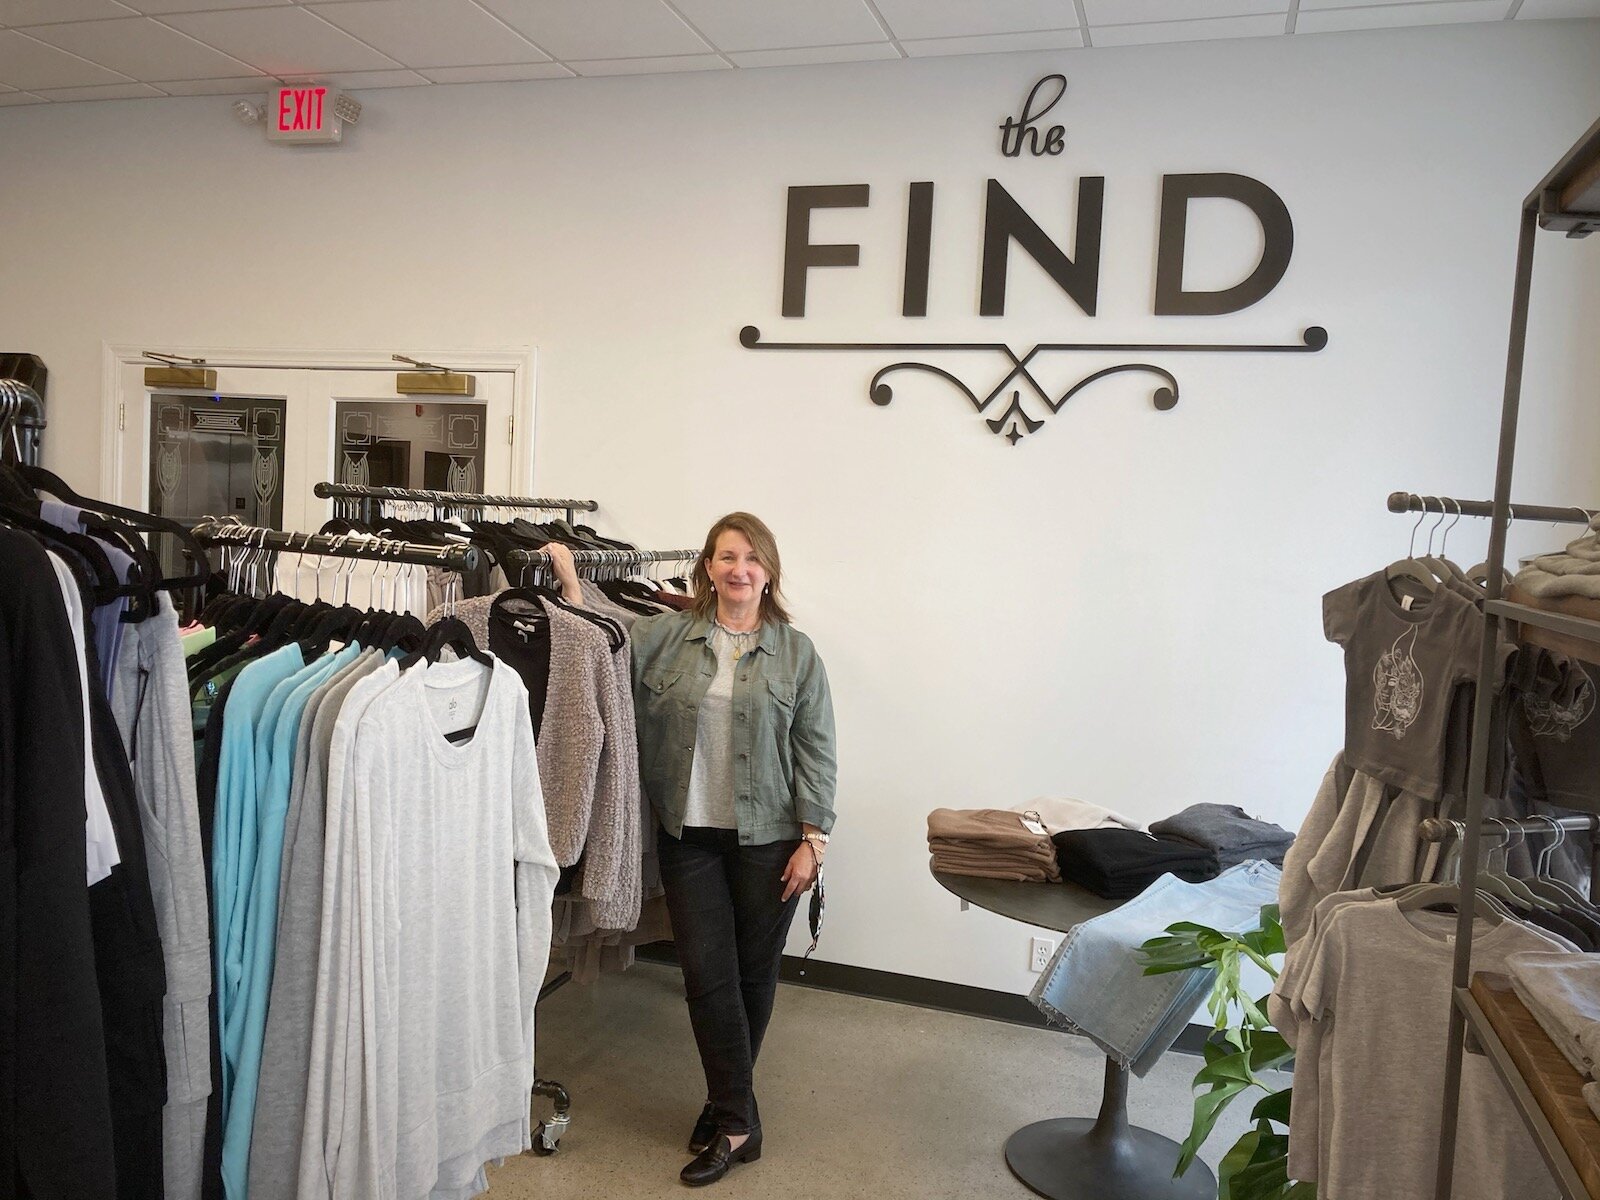 Wilson opened The Find in downtown Fort Wayne in 2016 and has since expanded her shop.